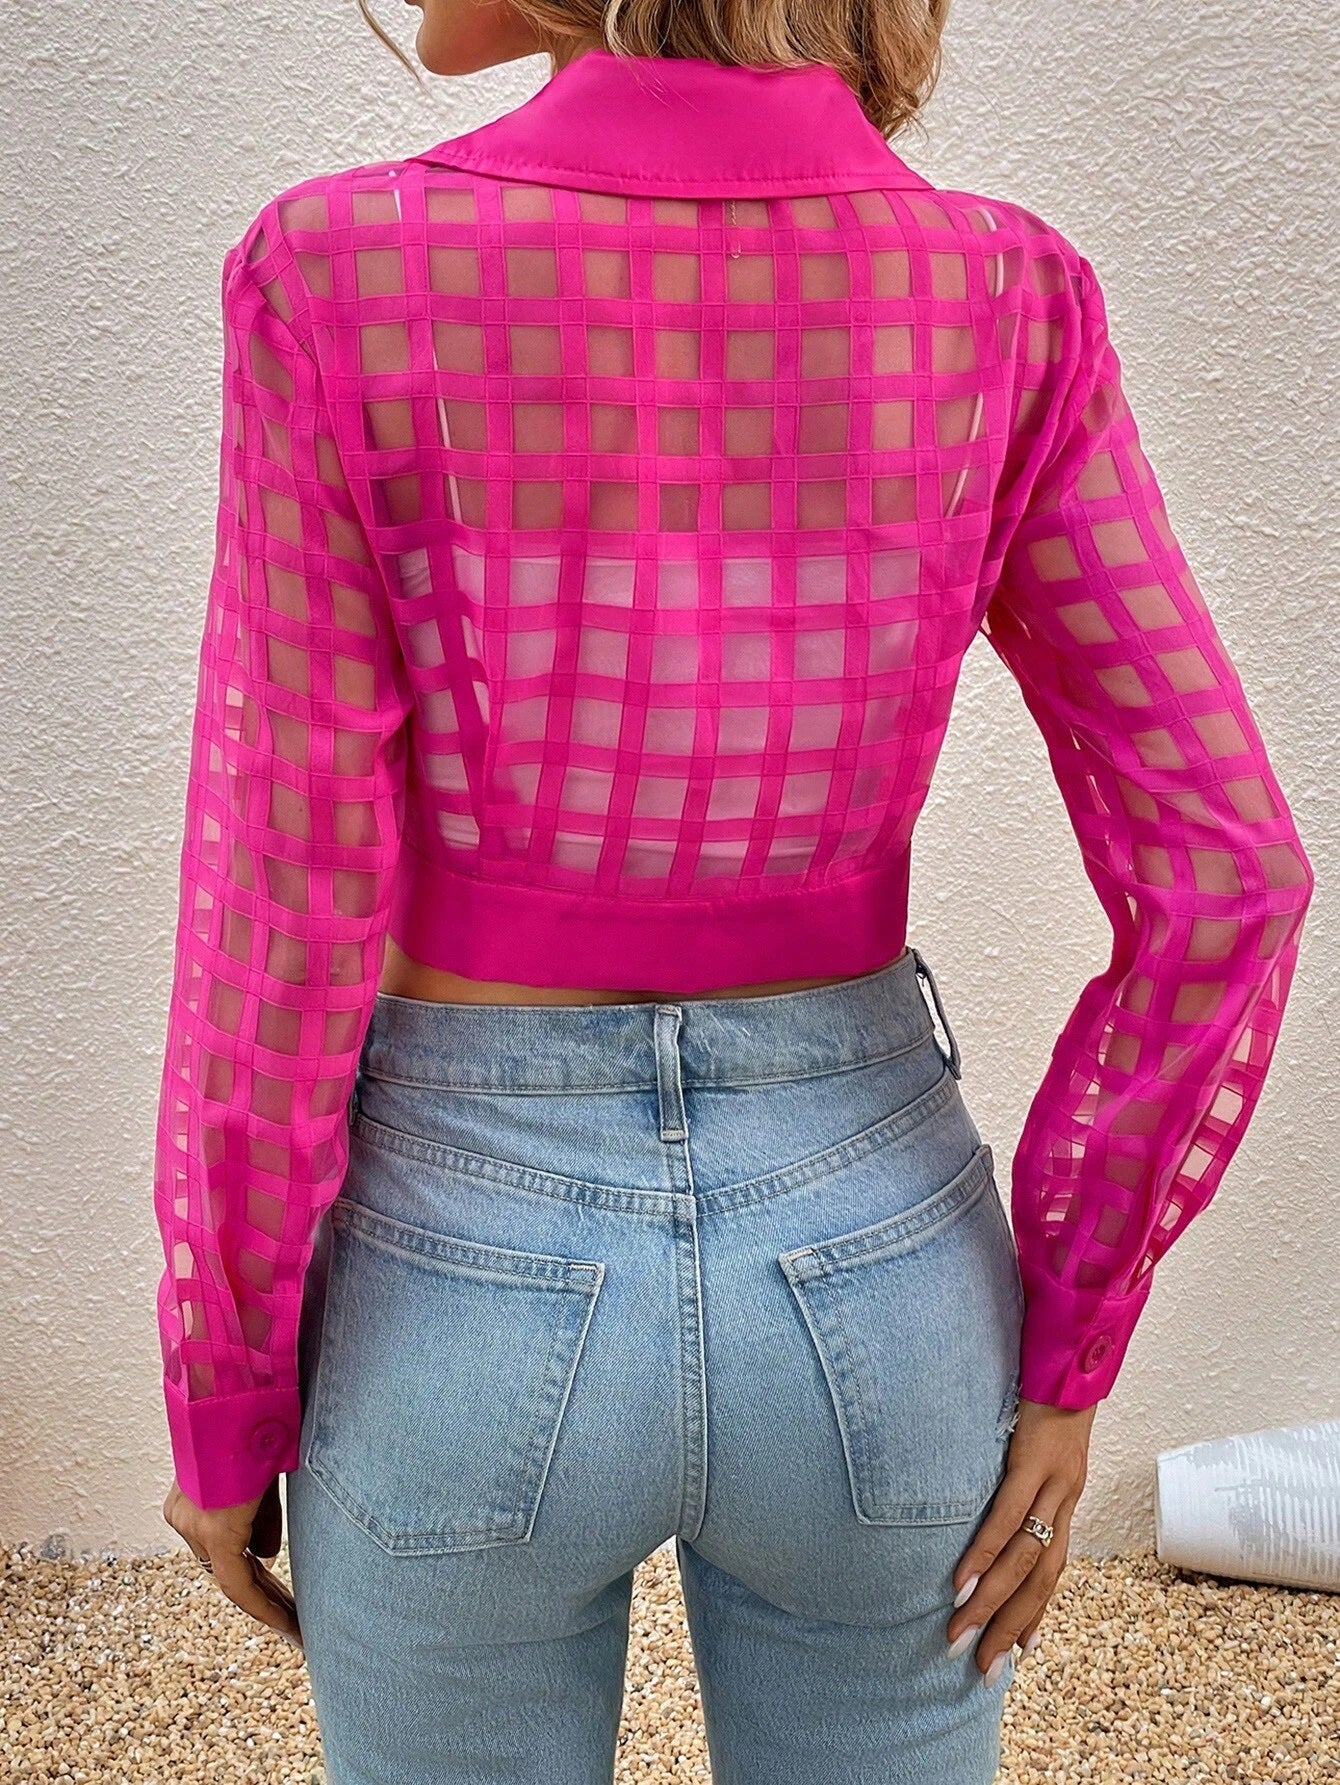 CM-CS560509 Women Casual Seoul Style Button Front Crop Long Sleeve Jacket - Hot Pink